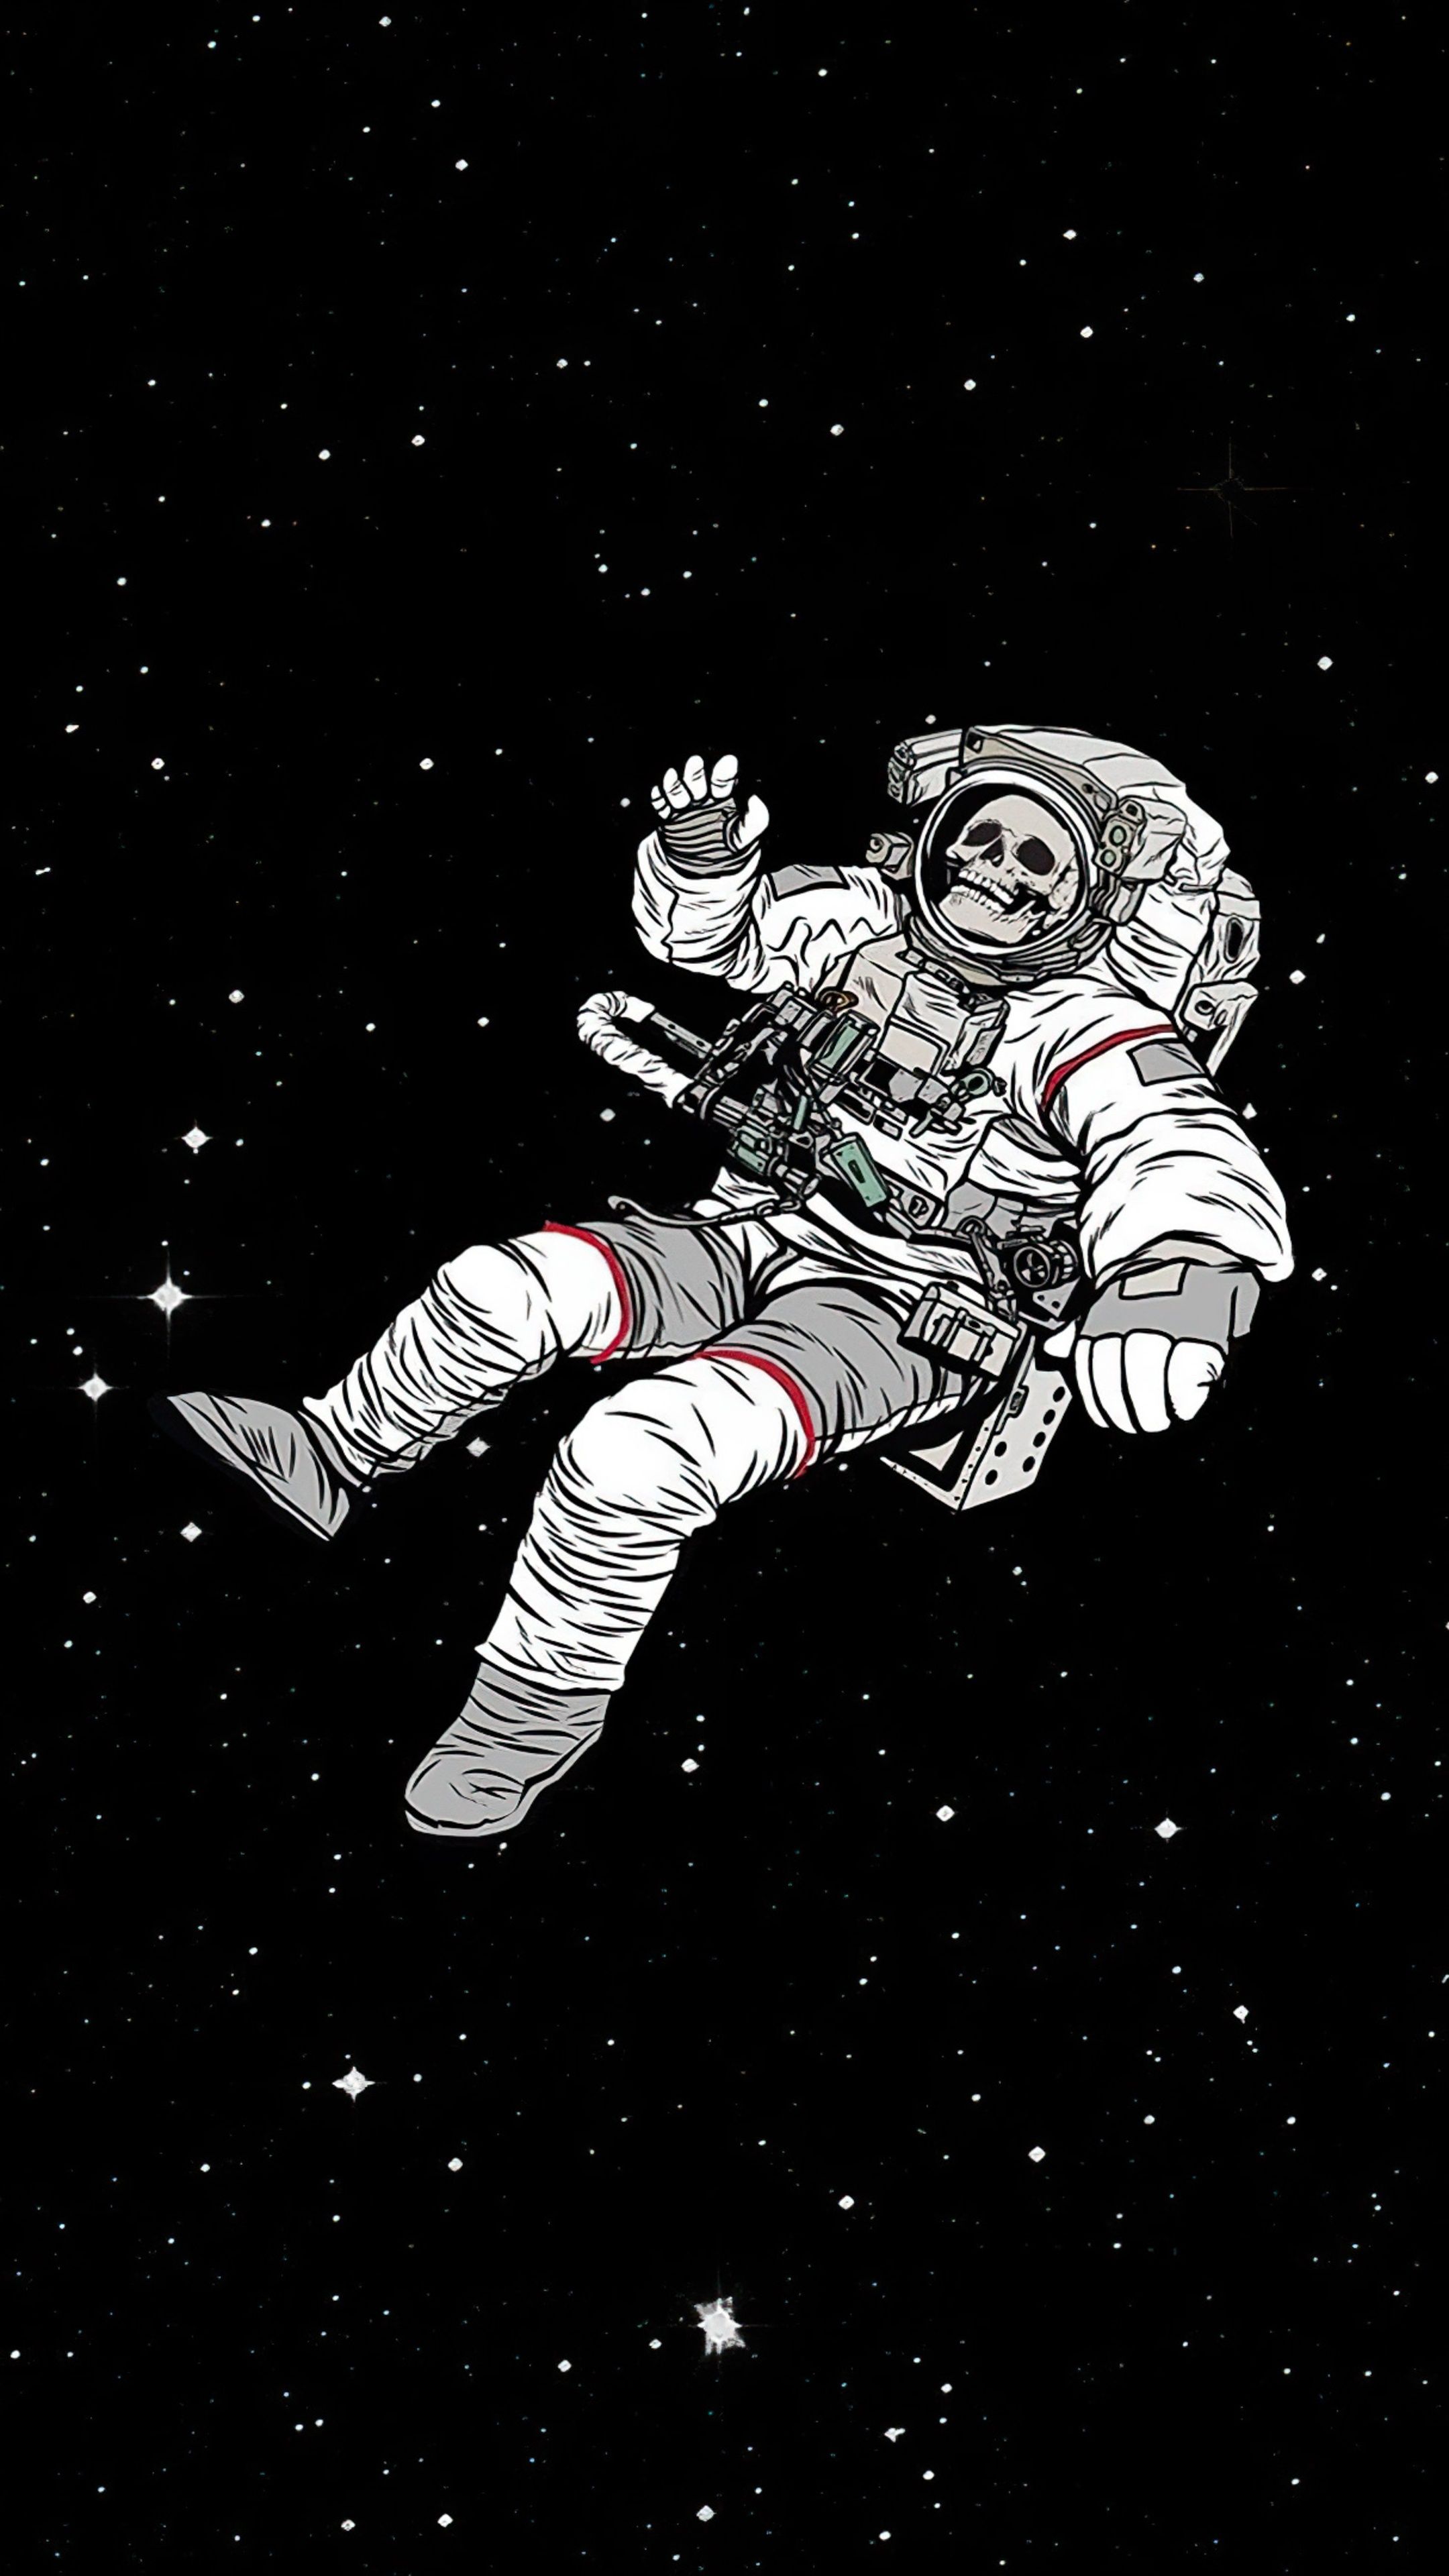 IPhone wallpaper of a skeleton astronaut floating in space - Astronaut